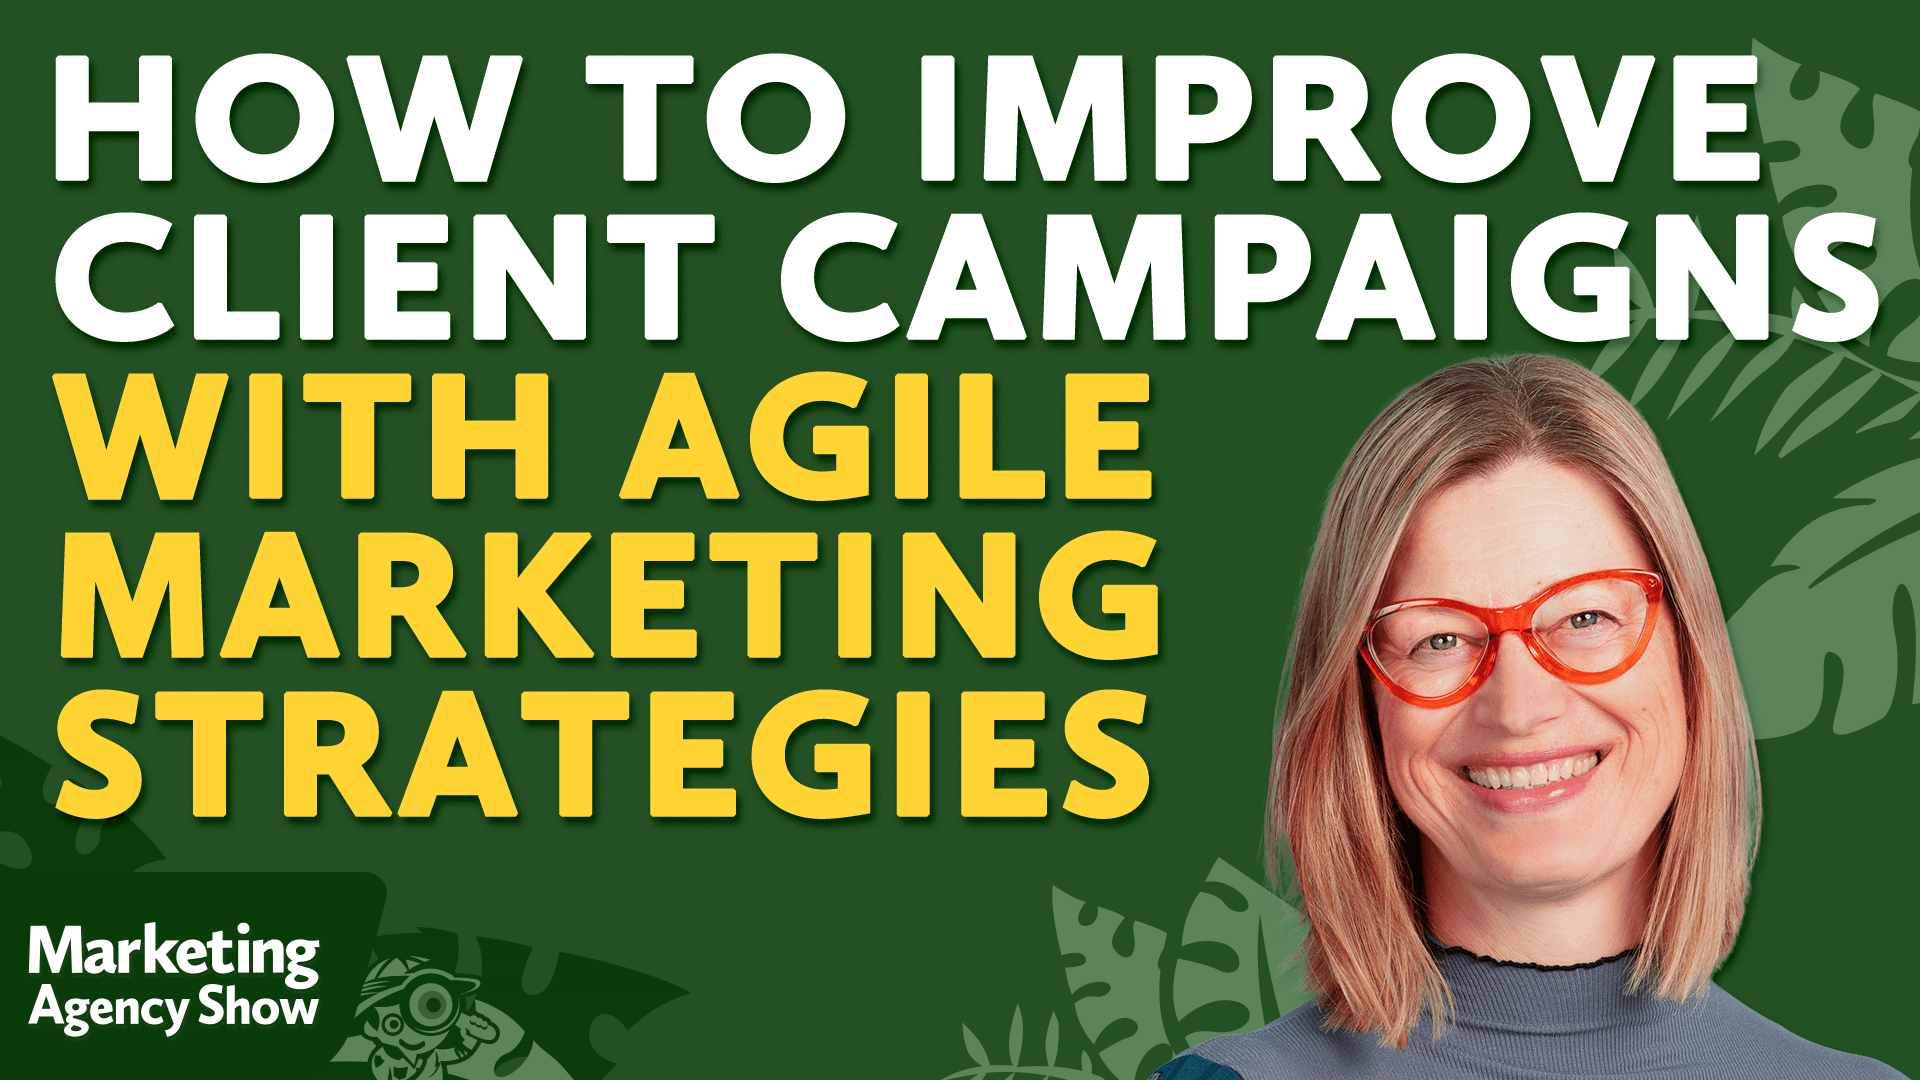 How to Improve Client Campaigns With Agile Marketing Strategies by Social Media Examiner